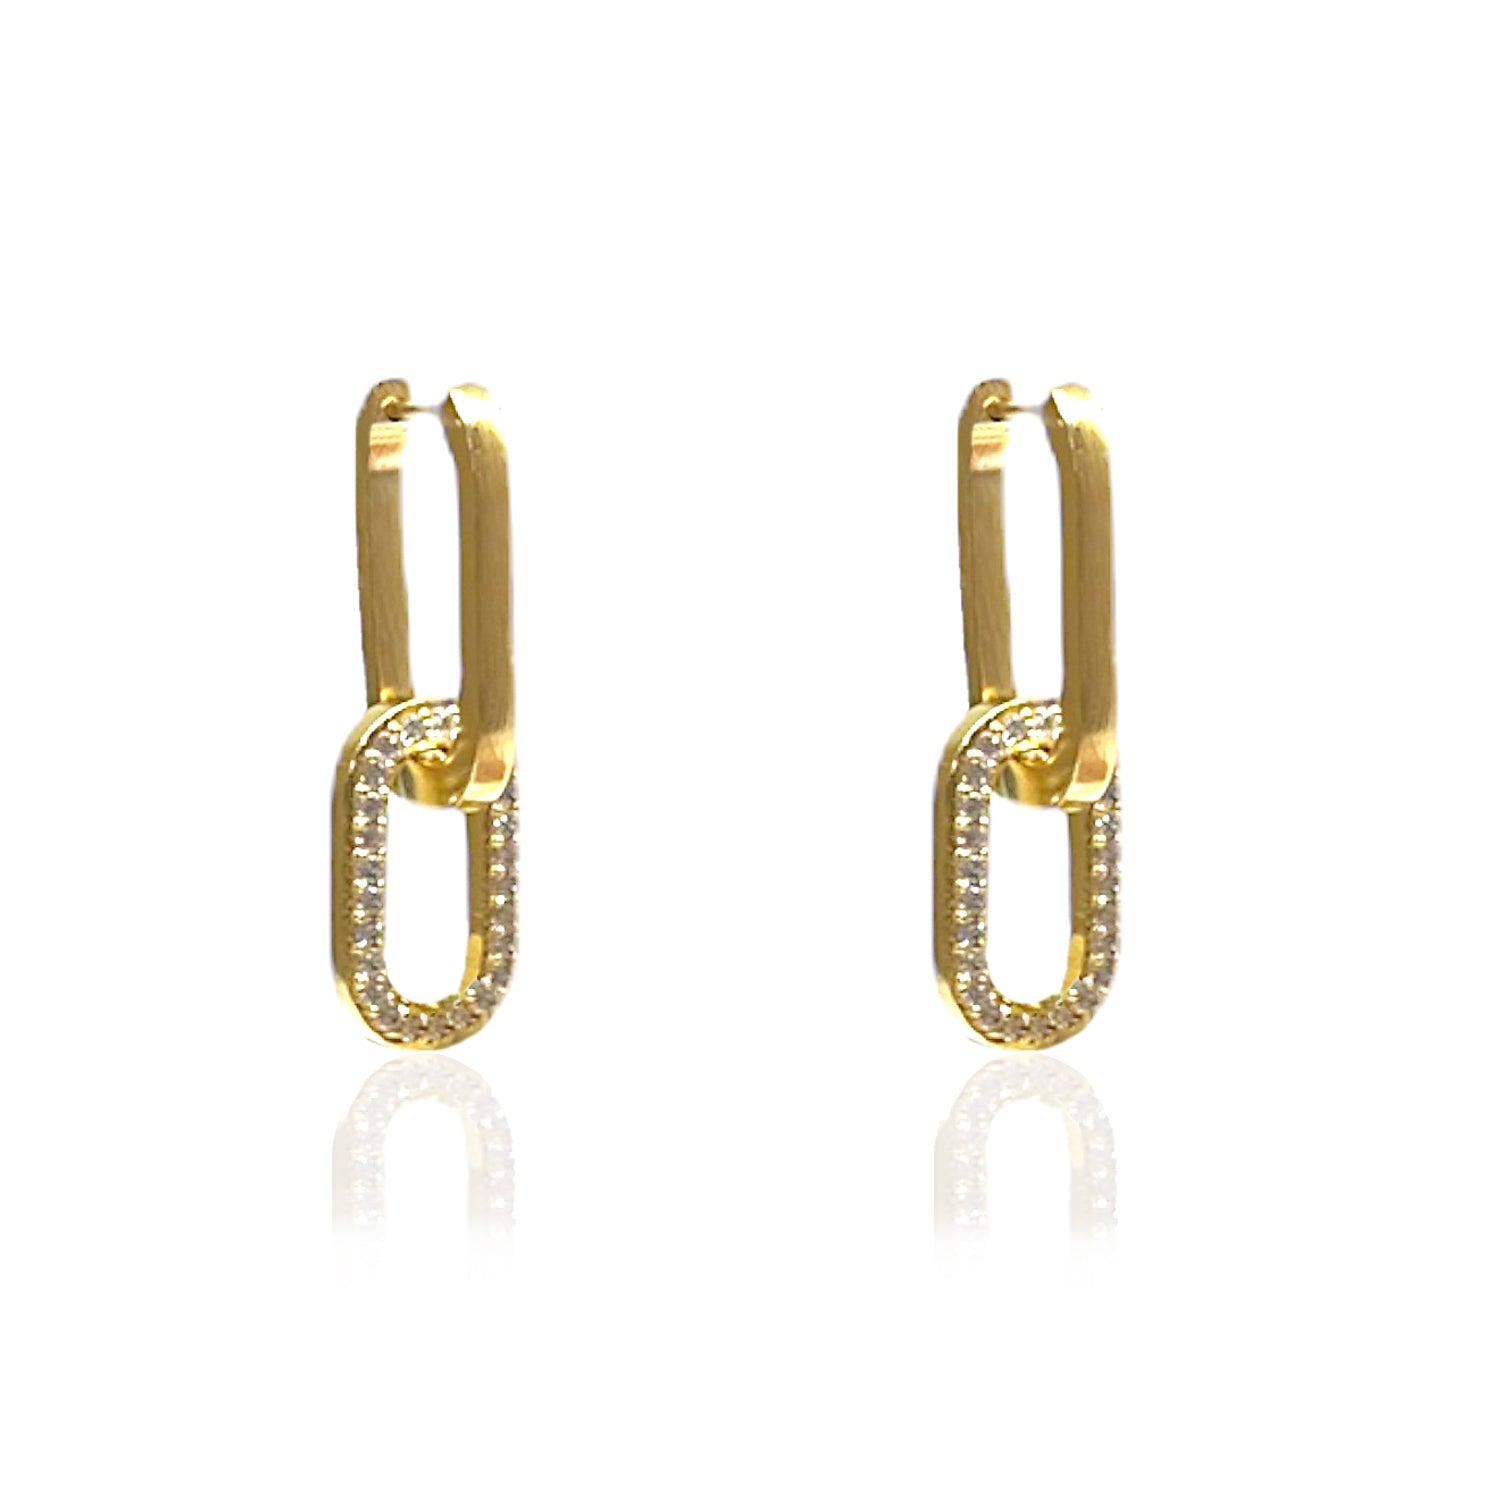 GOLD DOUBLE PAVE RICO EARRING